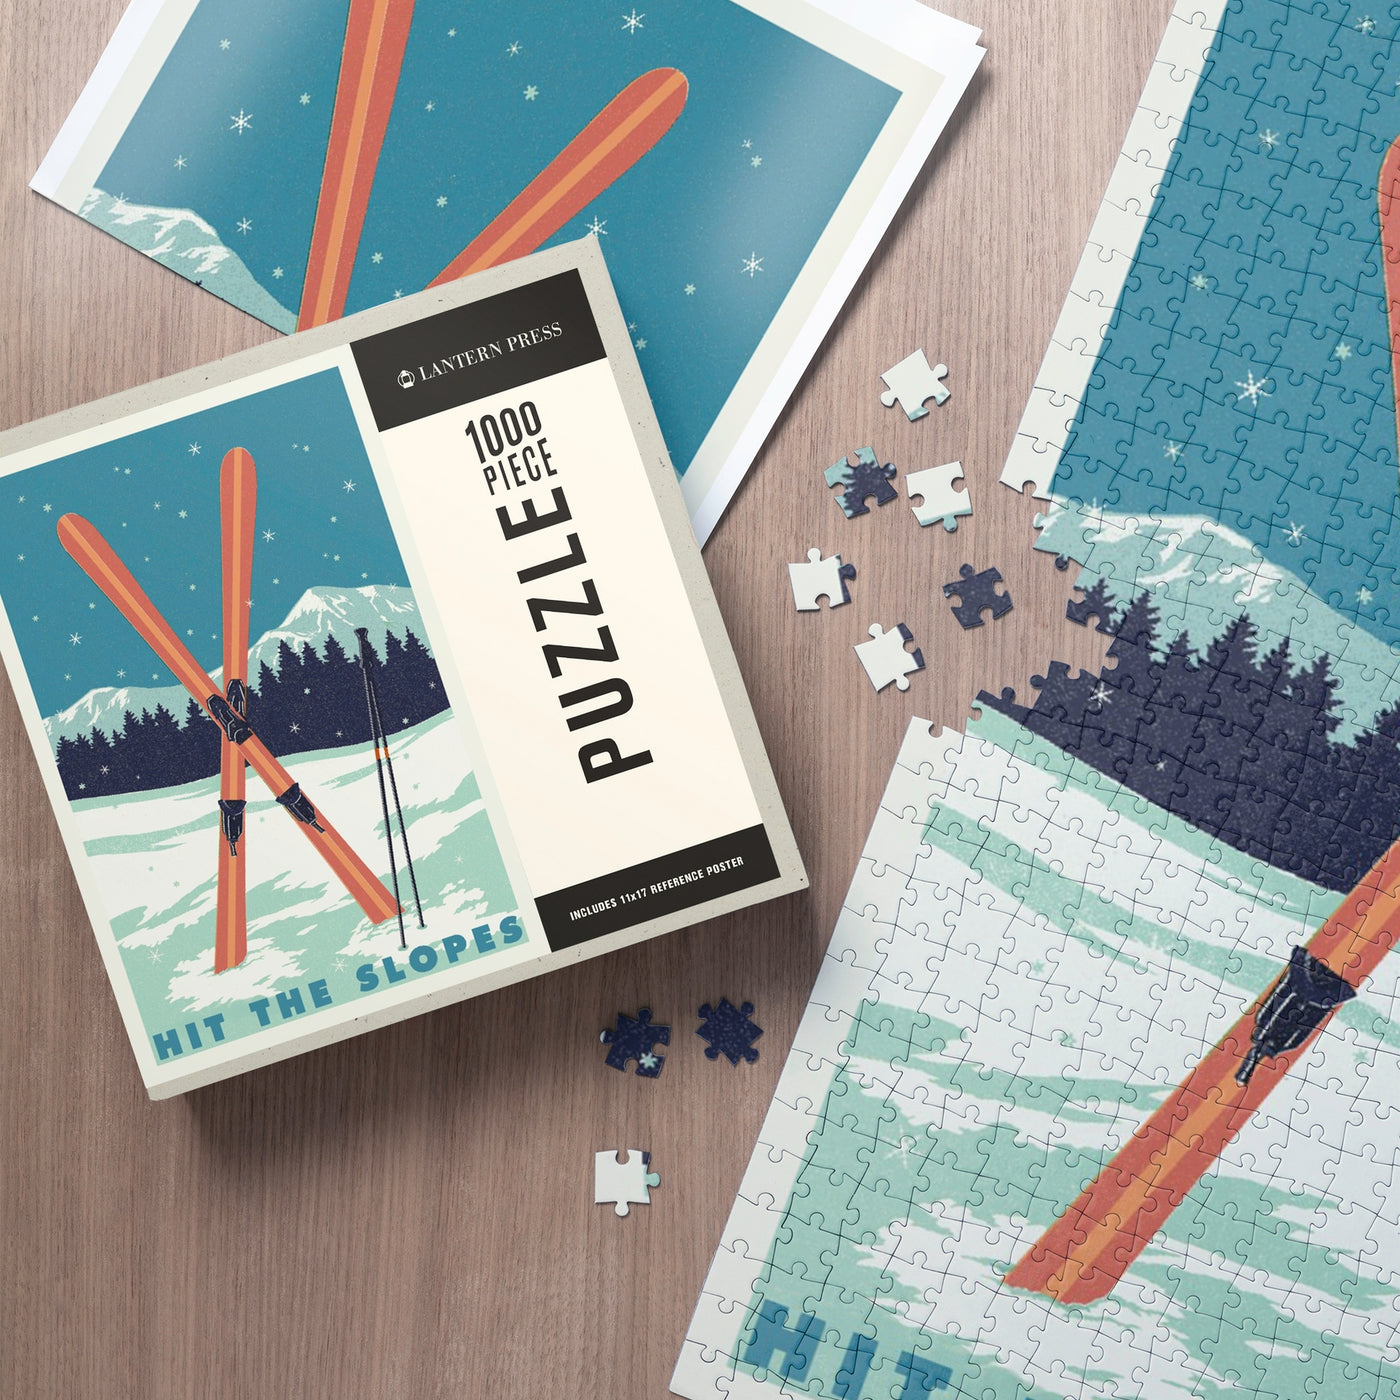 Hit the Slopes | 1,000 Piece Jigsaw Puzzle